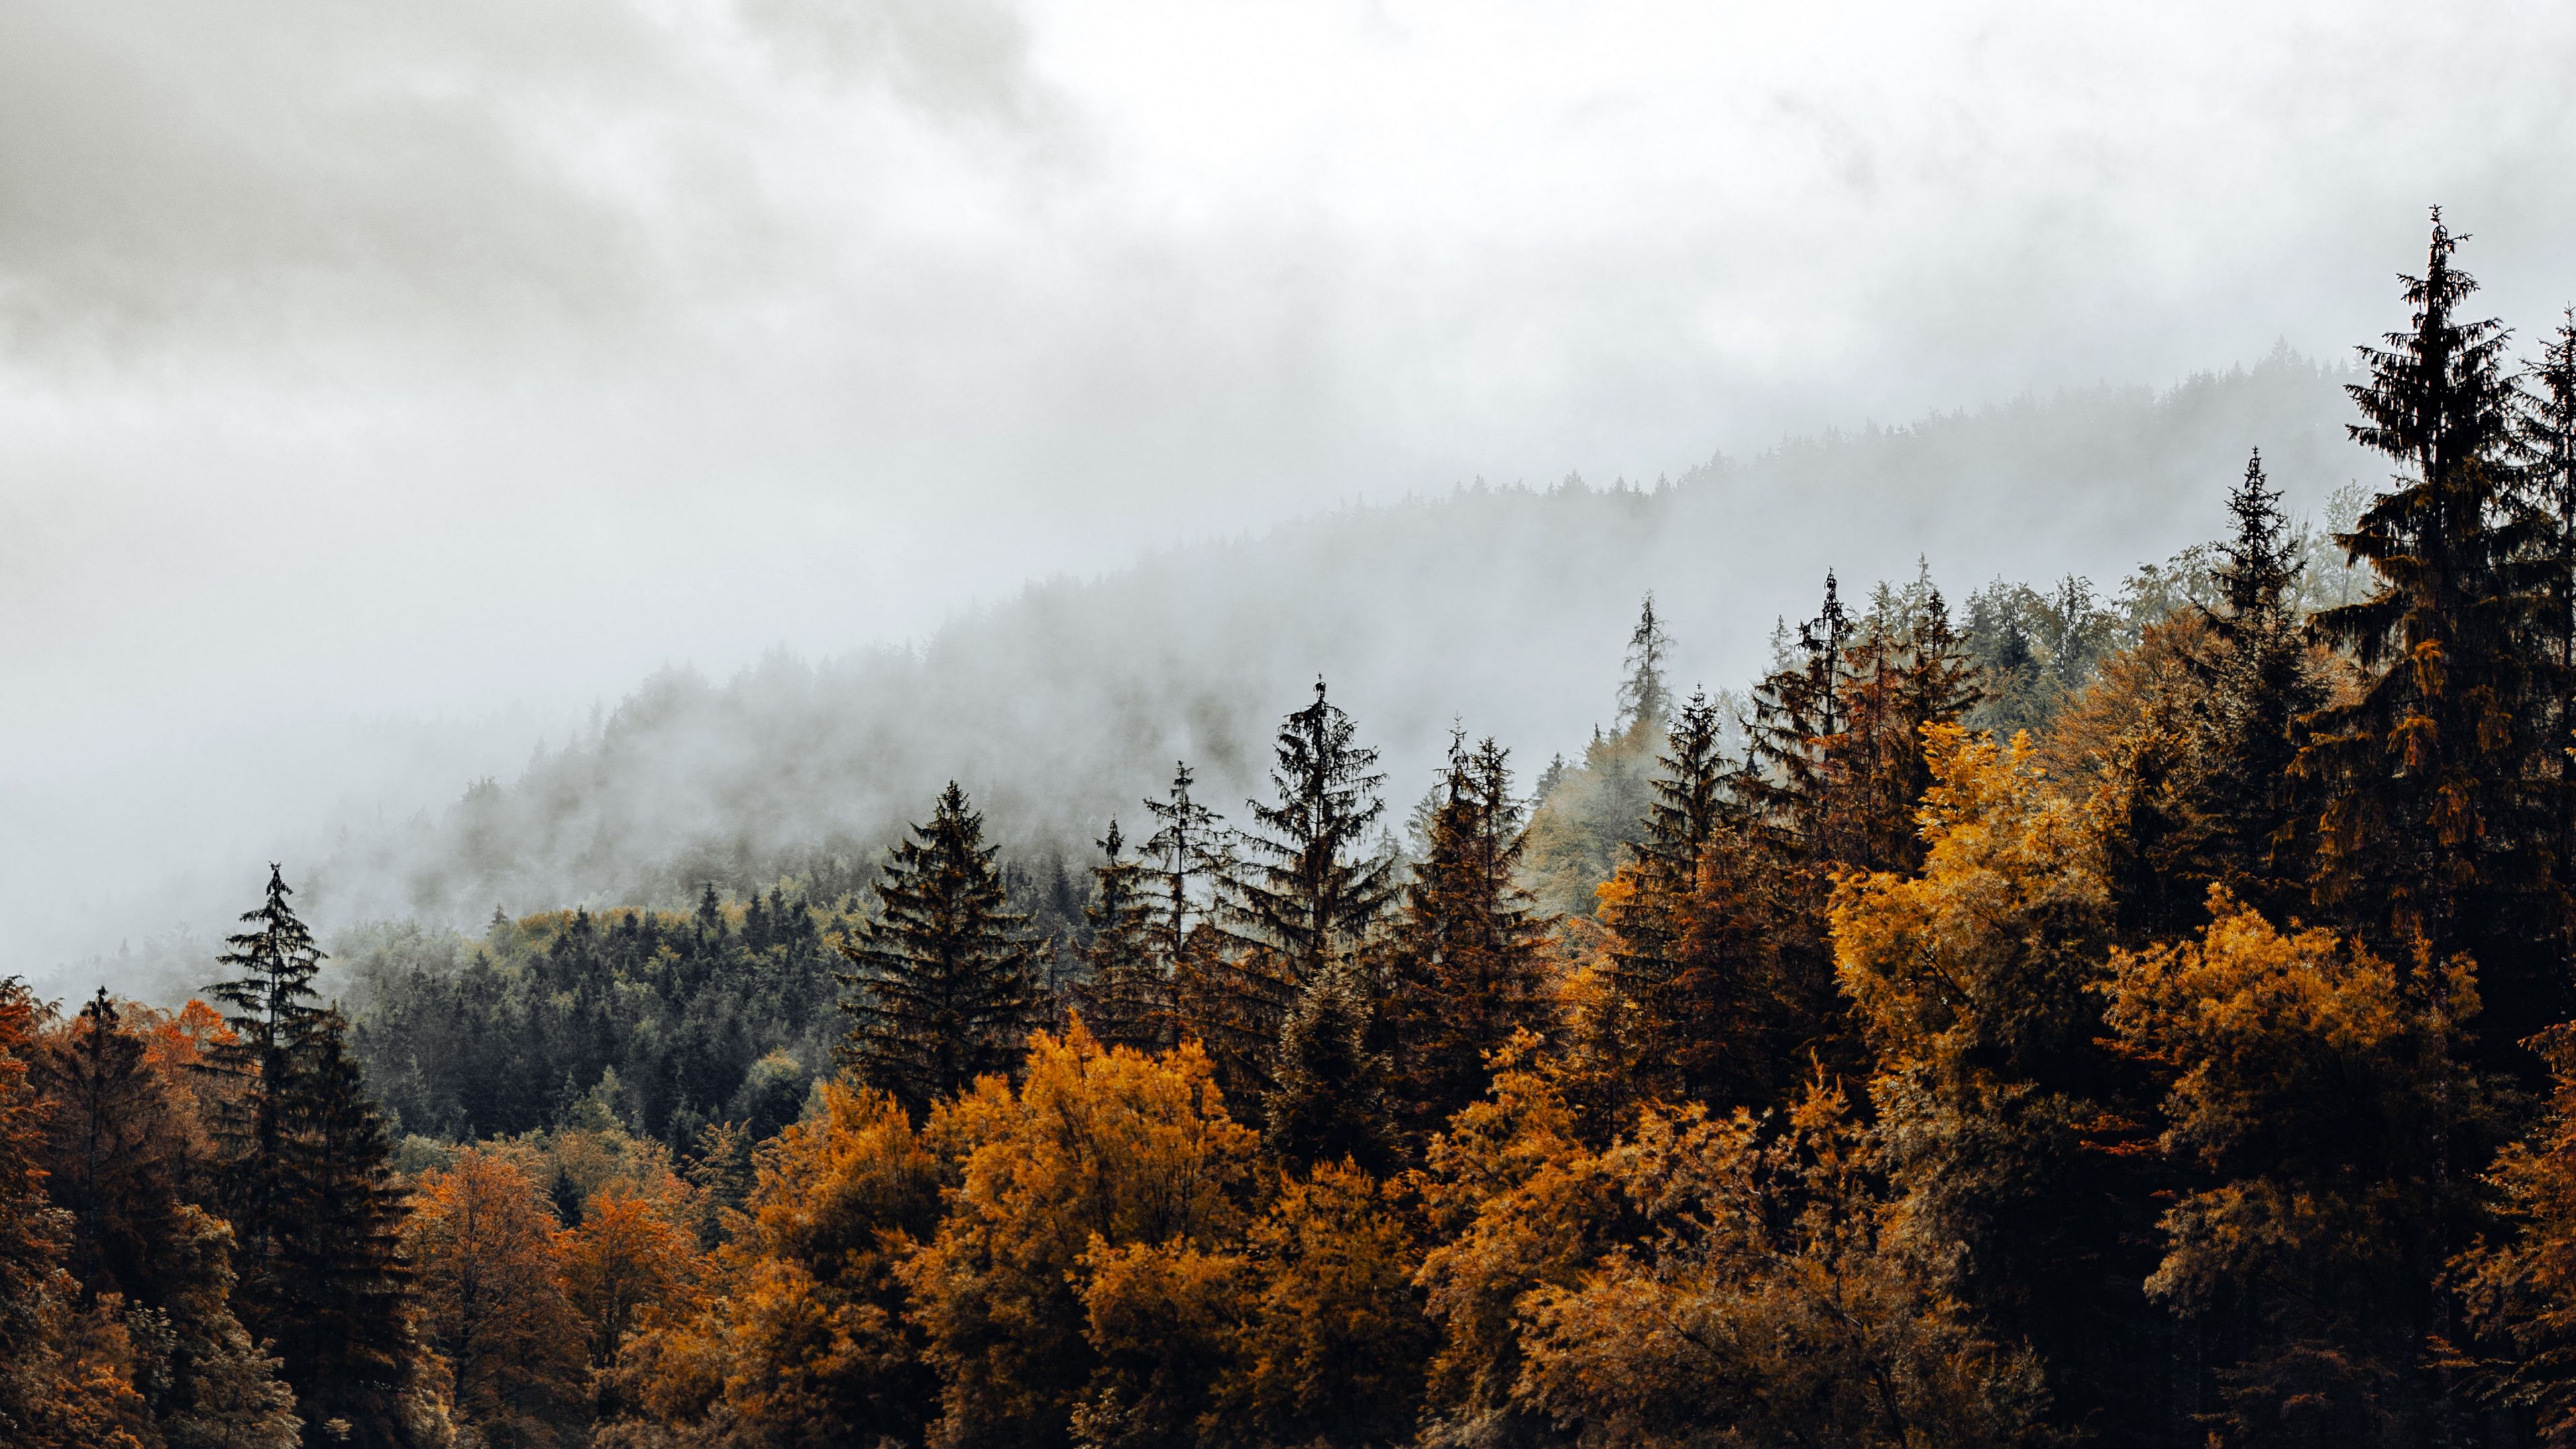 Download wallpaper 3840x2160 spruce, forest, fog, river, autumn 4k uhd 16:9  hd background